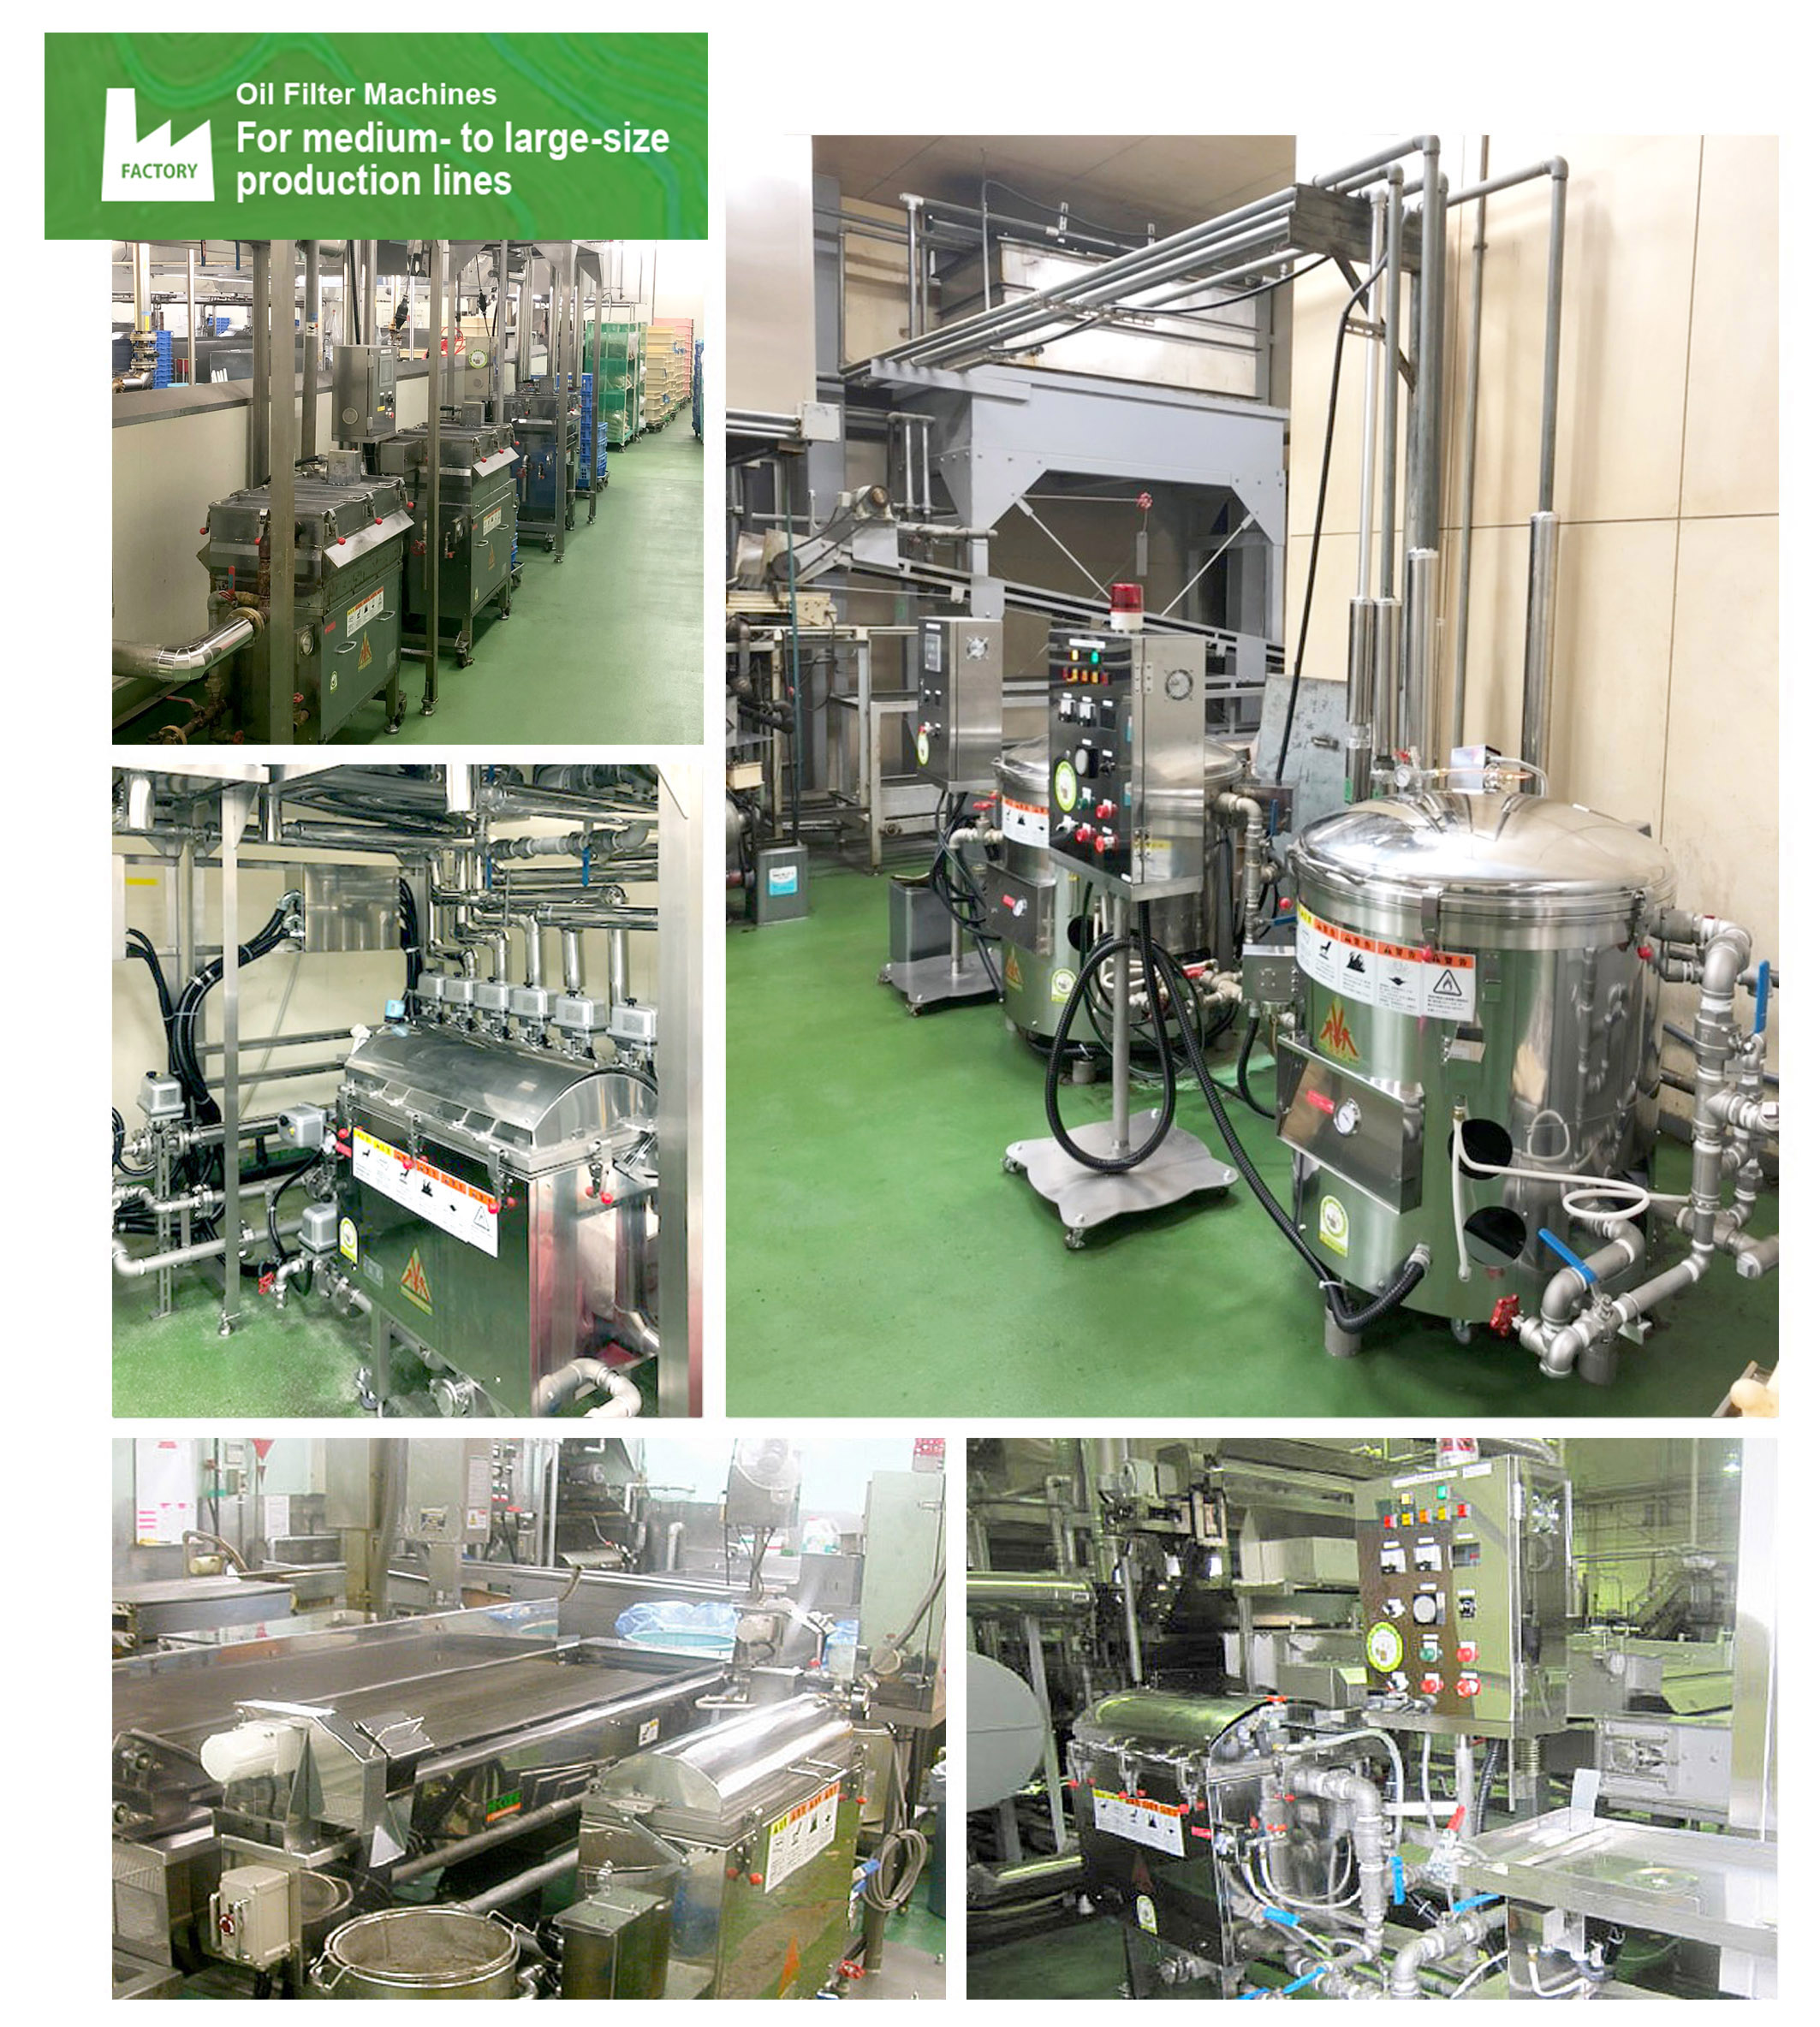 Oil Filter Machines (For medium- to large-size production lines)